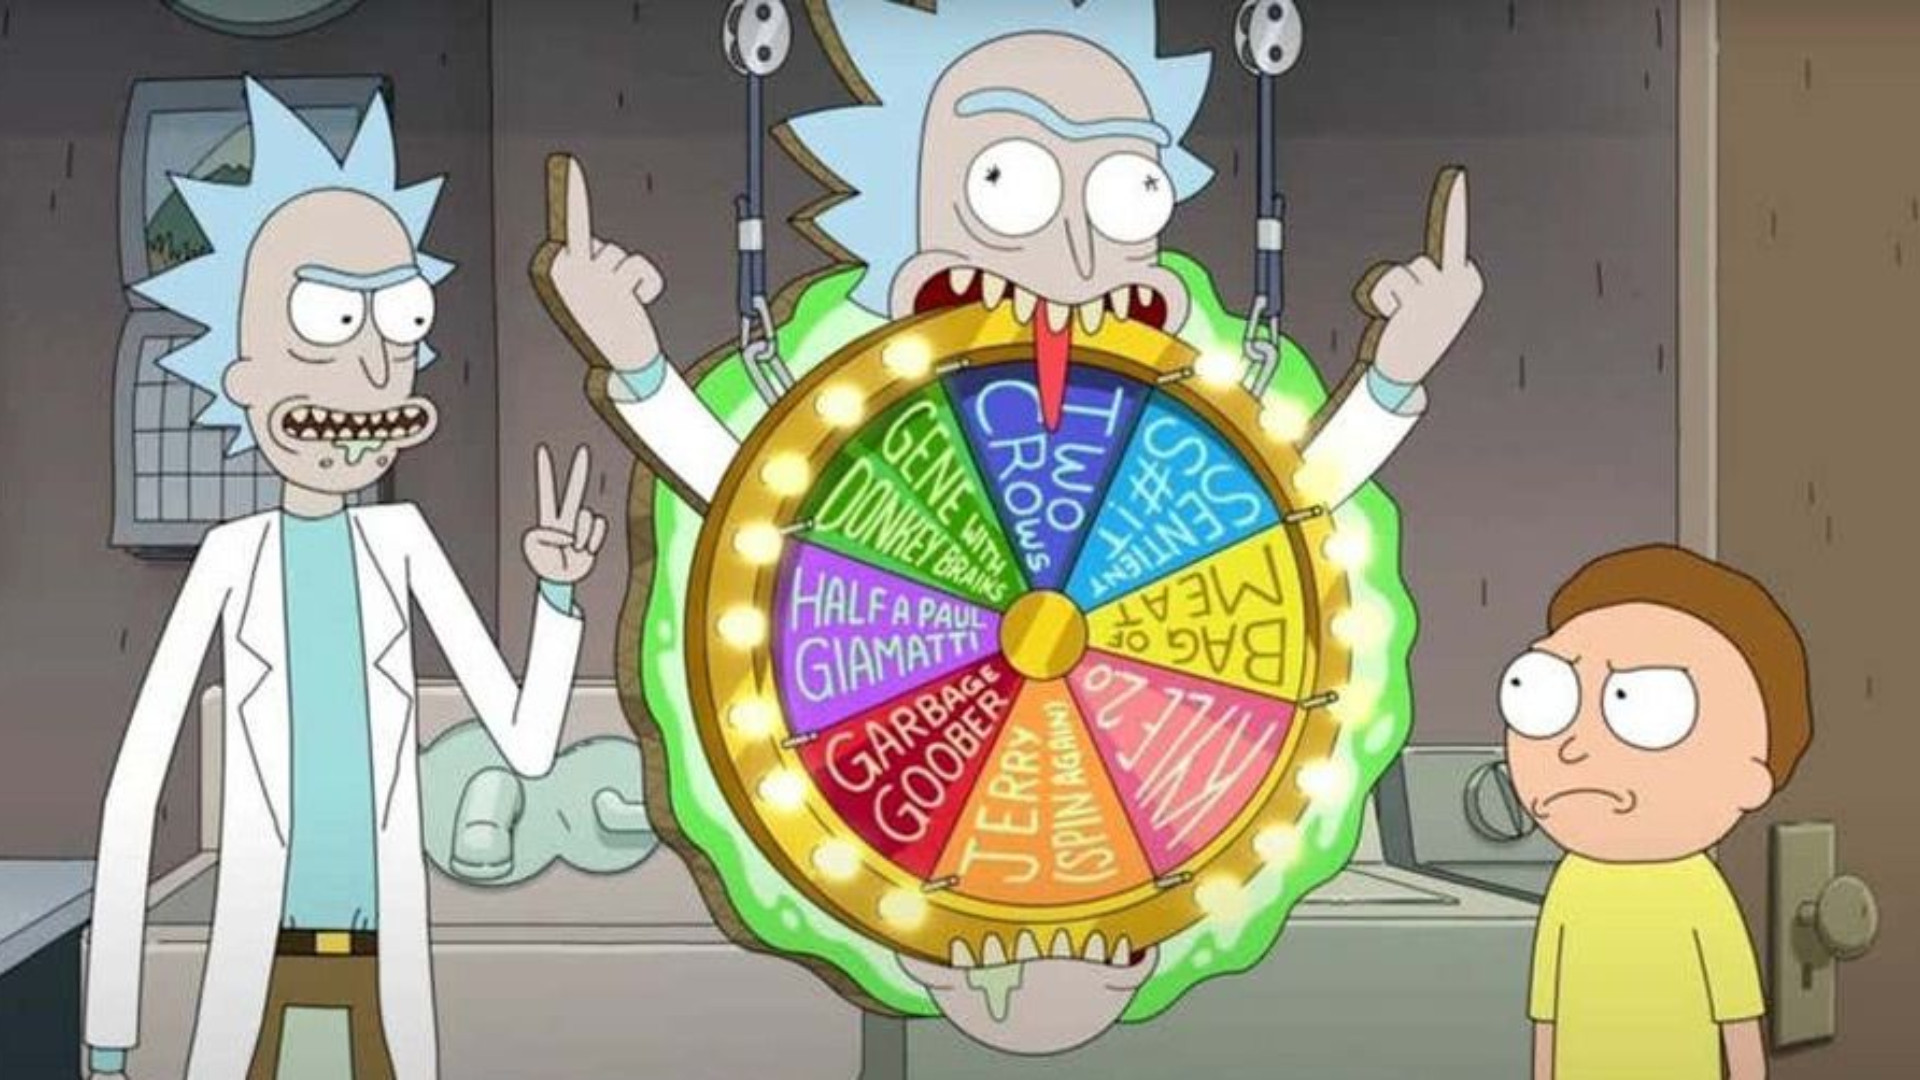 Rick and Morty in Season 5 episodes